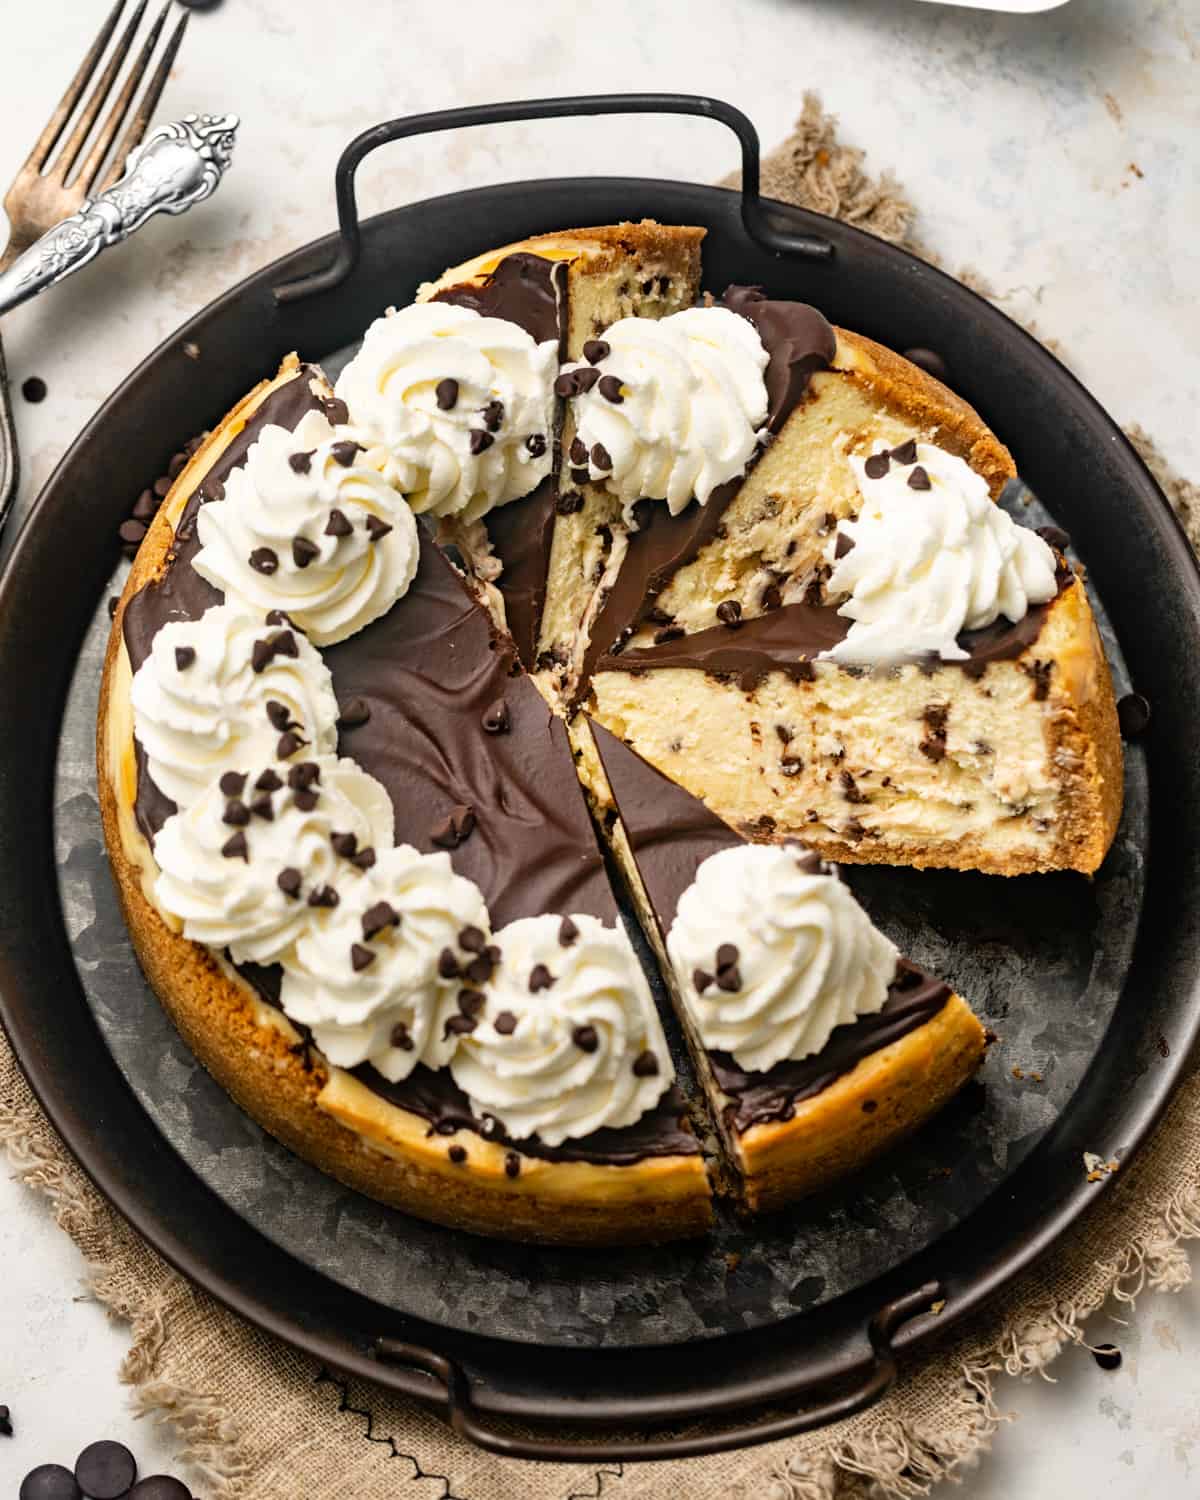 a chocolate chip cheesecake on a black serving tray with a few slices cut out of the cake.